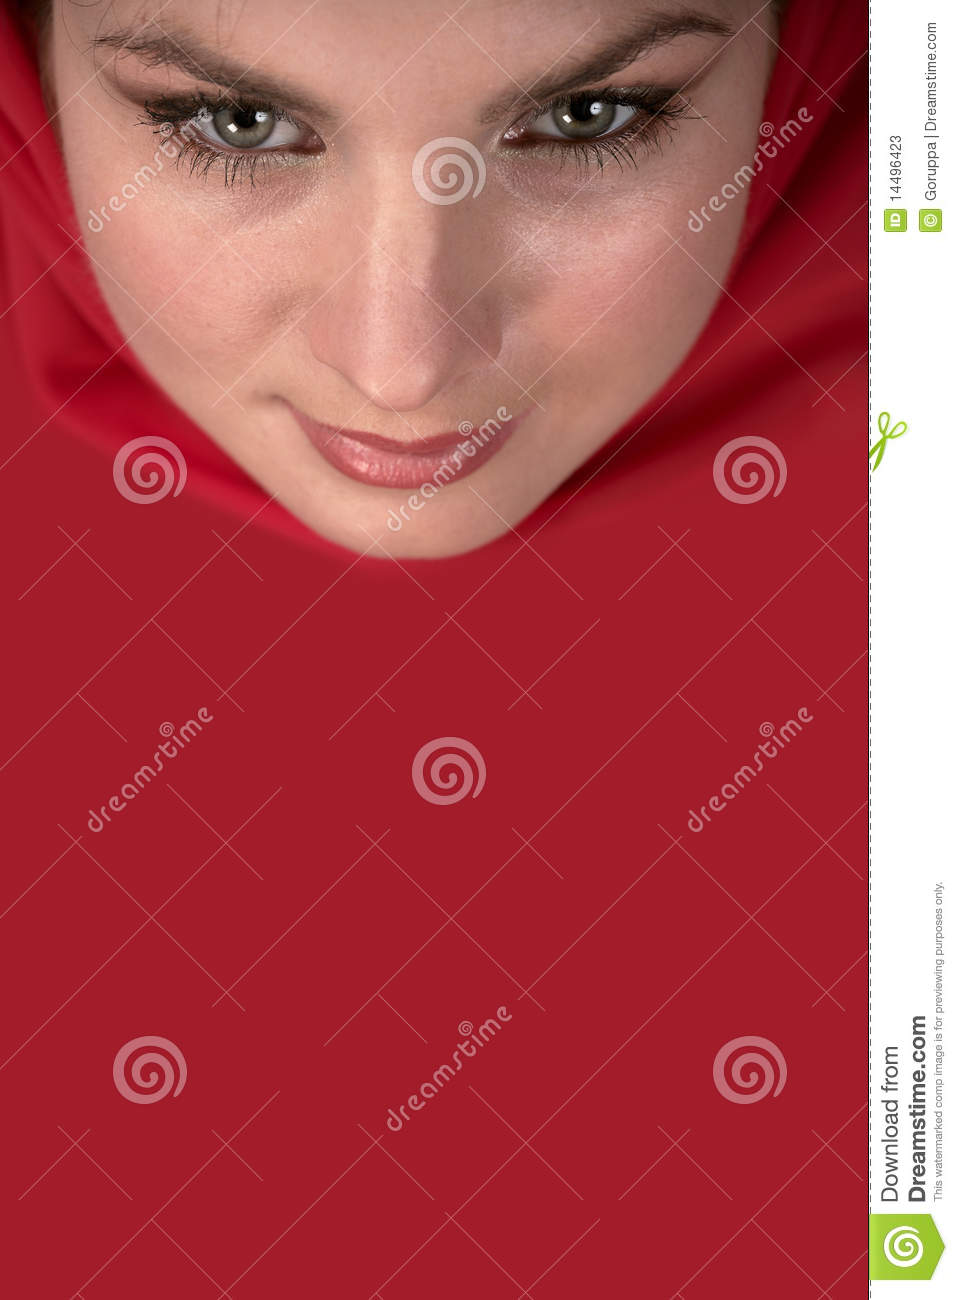 Woman In Red Scarf Stock Photos   Image  14496423